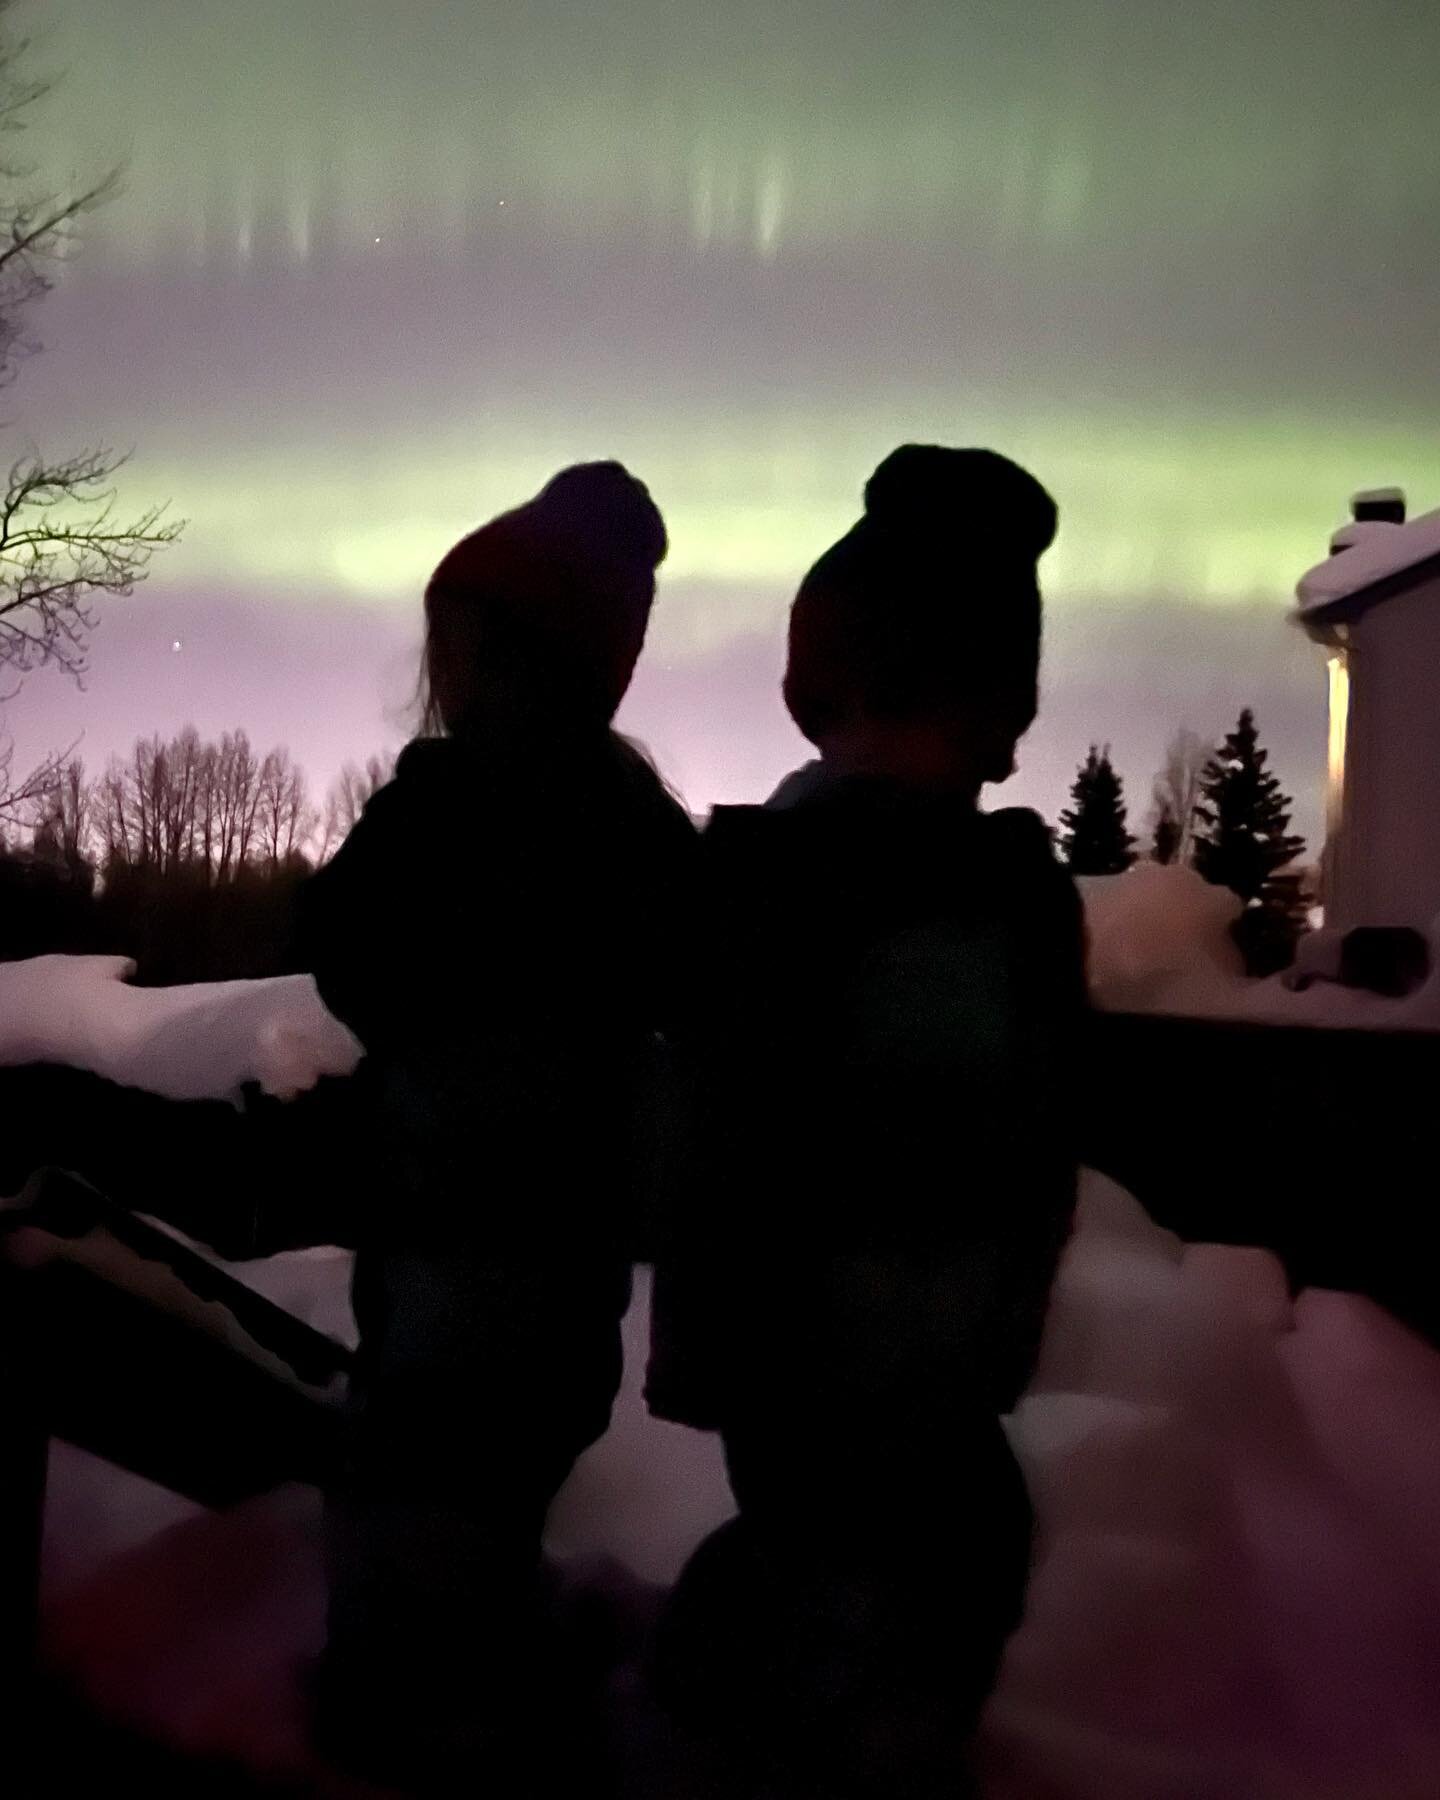 why not? 

the aurora is one thing that if you&rsquo;ve seen it once, you can see it over and over again with the same ear to ear grin. 

this is just a nice family-oriented exploitative post, cuz it&rsquo;s worth it! It was their first time last nig